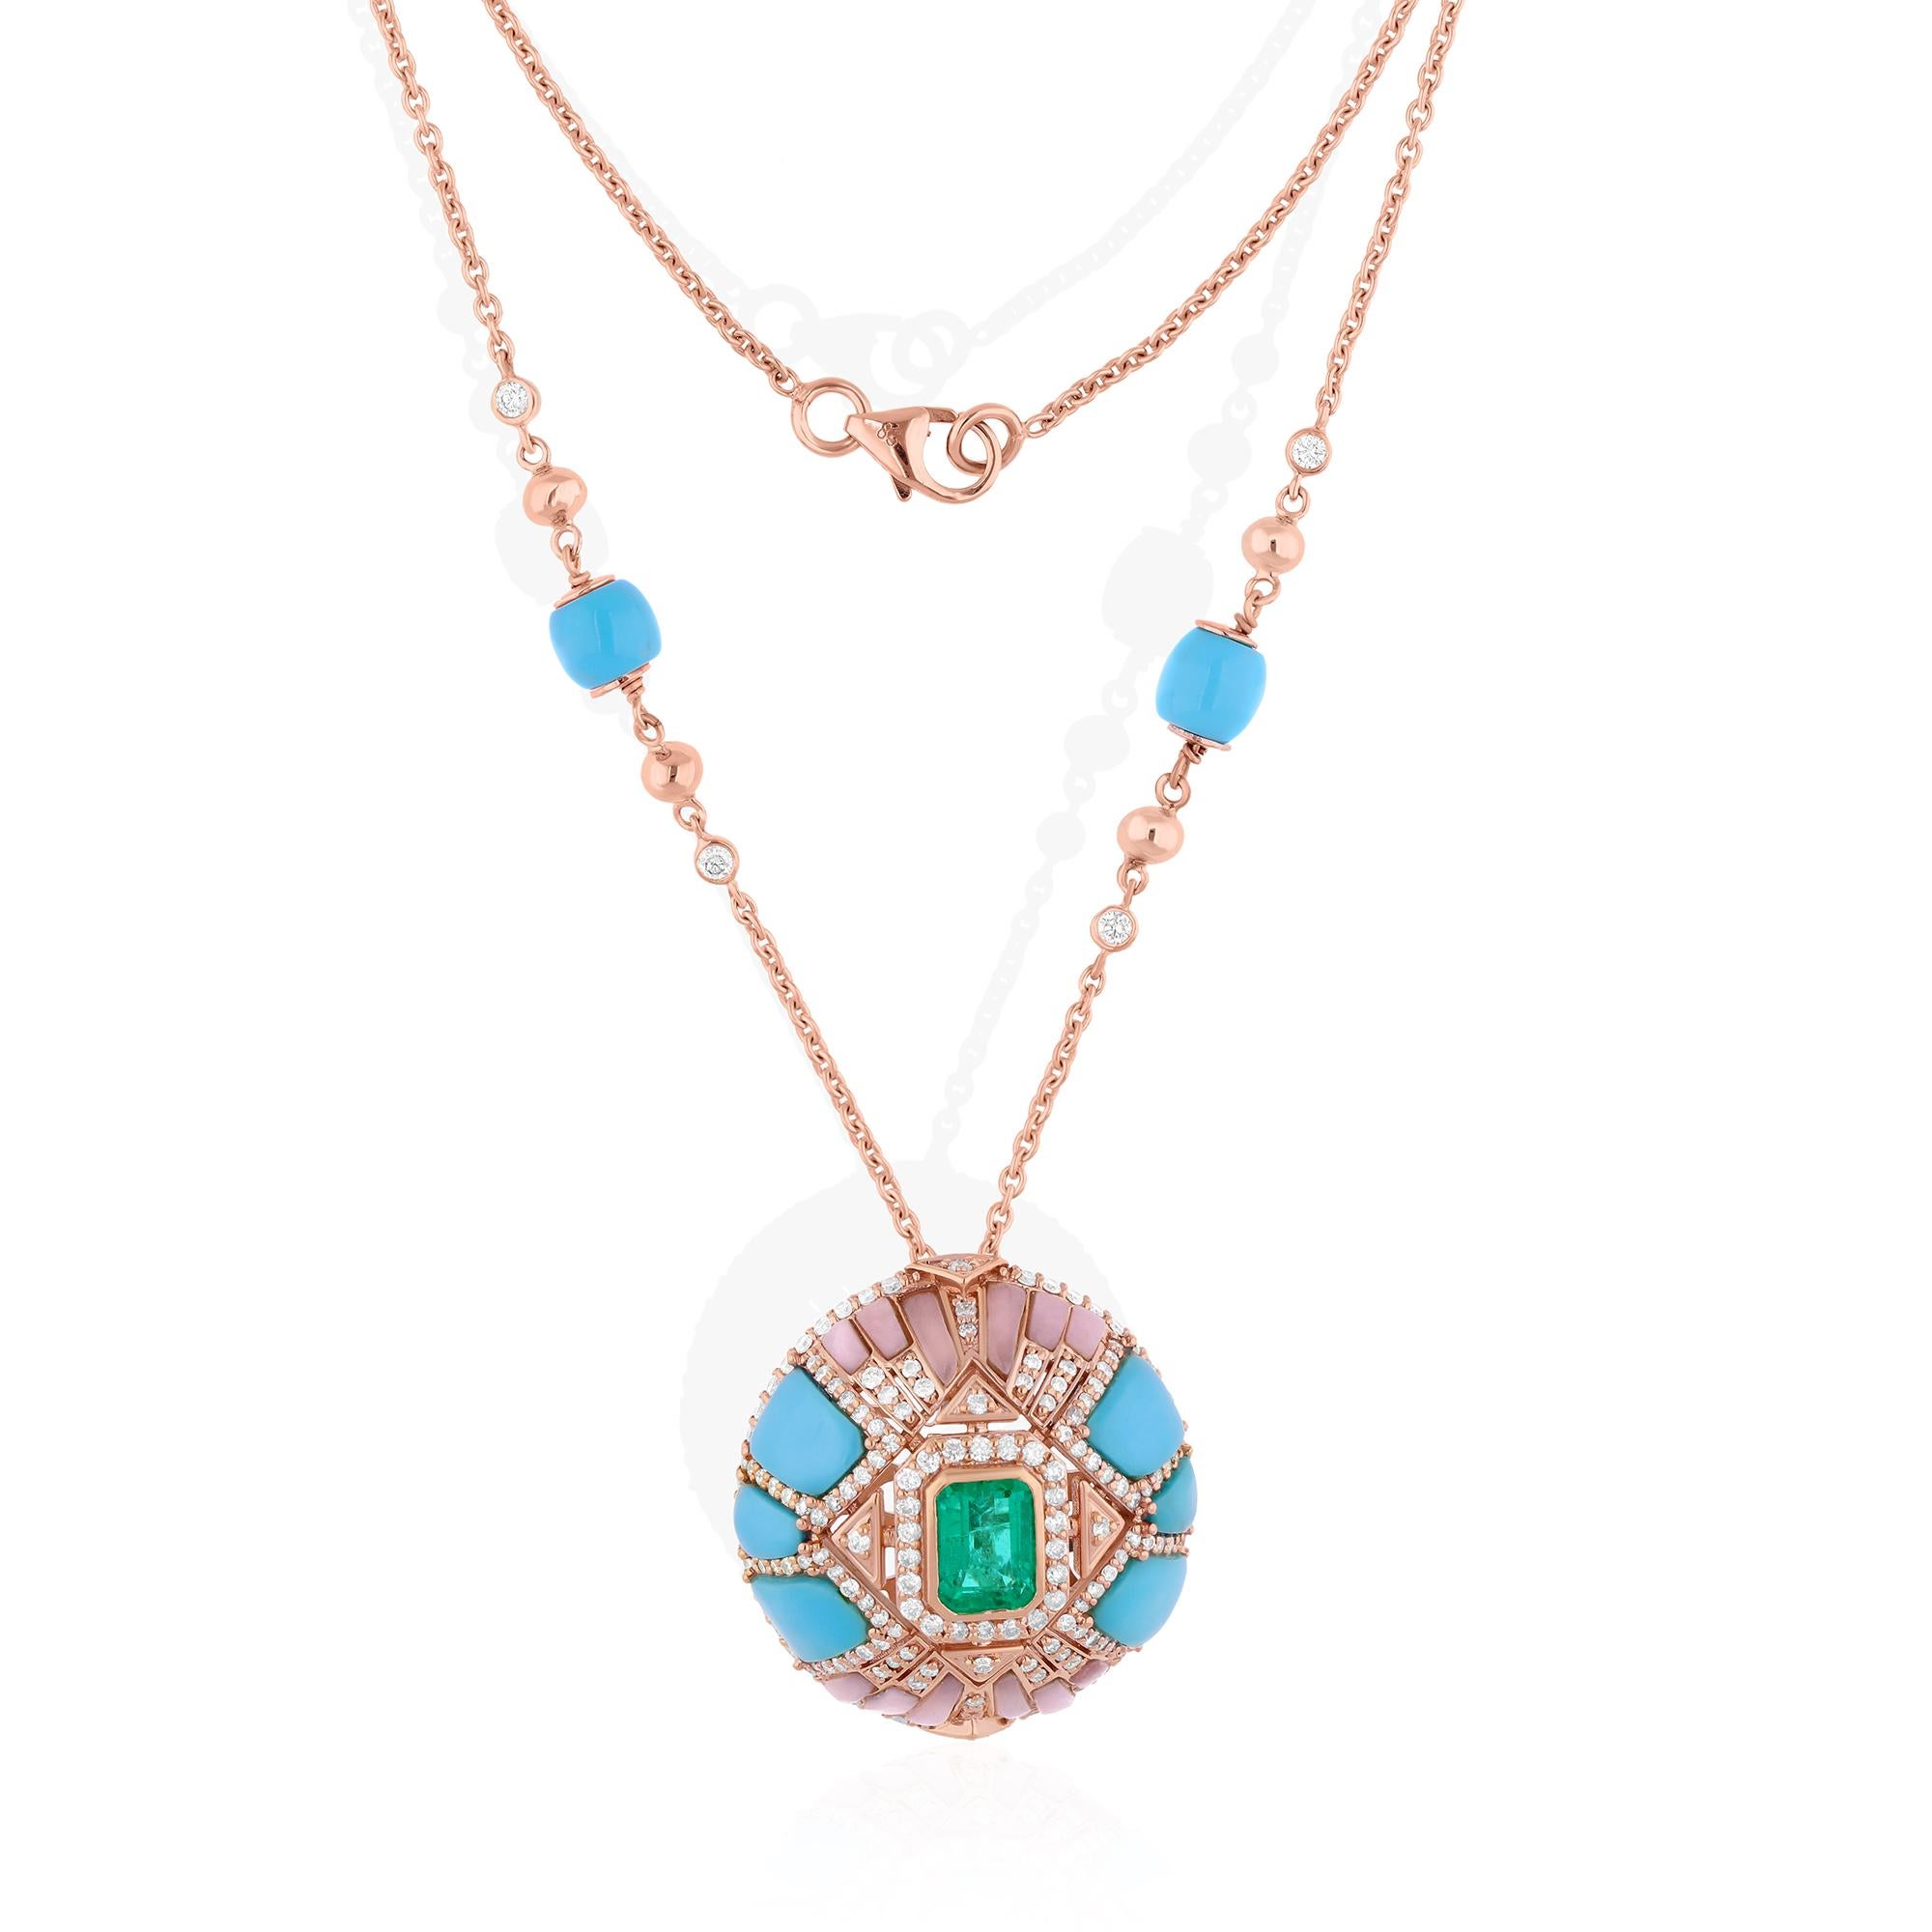 The focal point of this stunning necklace is the Arizona turquoise pendant, a gemstone renowned for its striking blue-green color reminiscent of the clear desert skies. Surrounding the turquoise are radiant Zambian emeralds, each carefully chosen